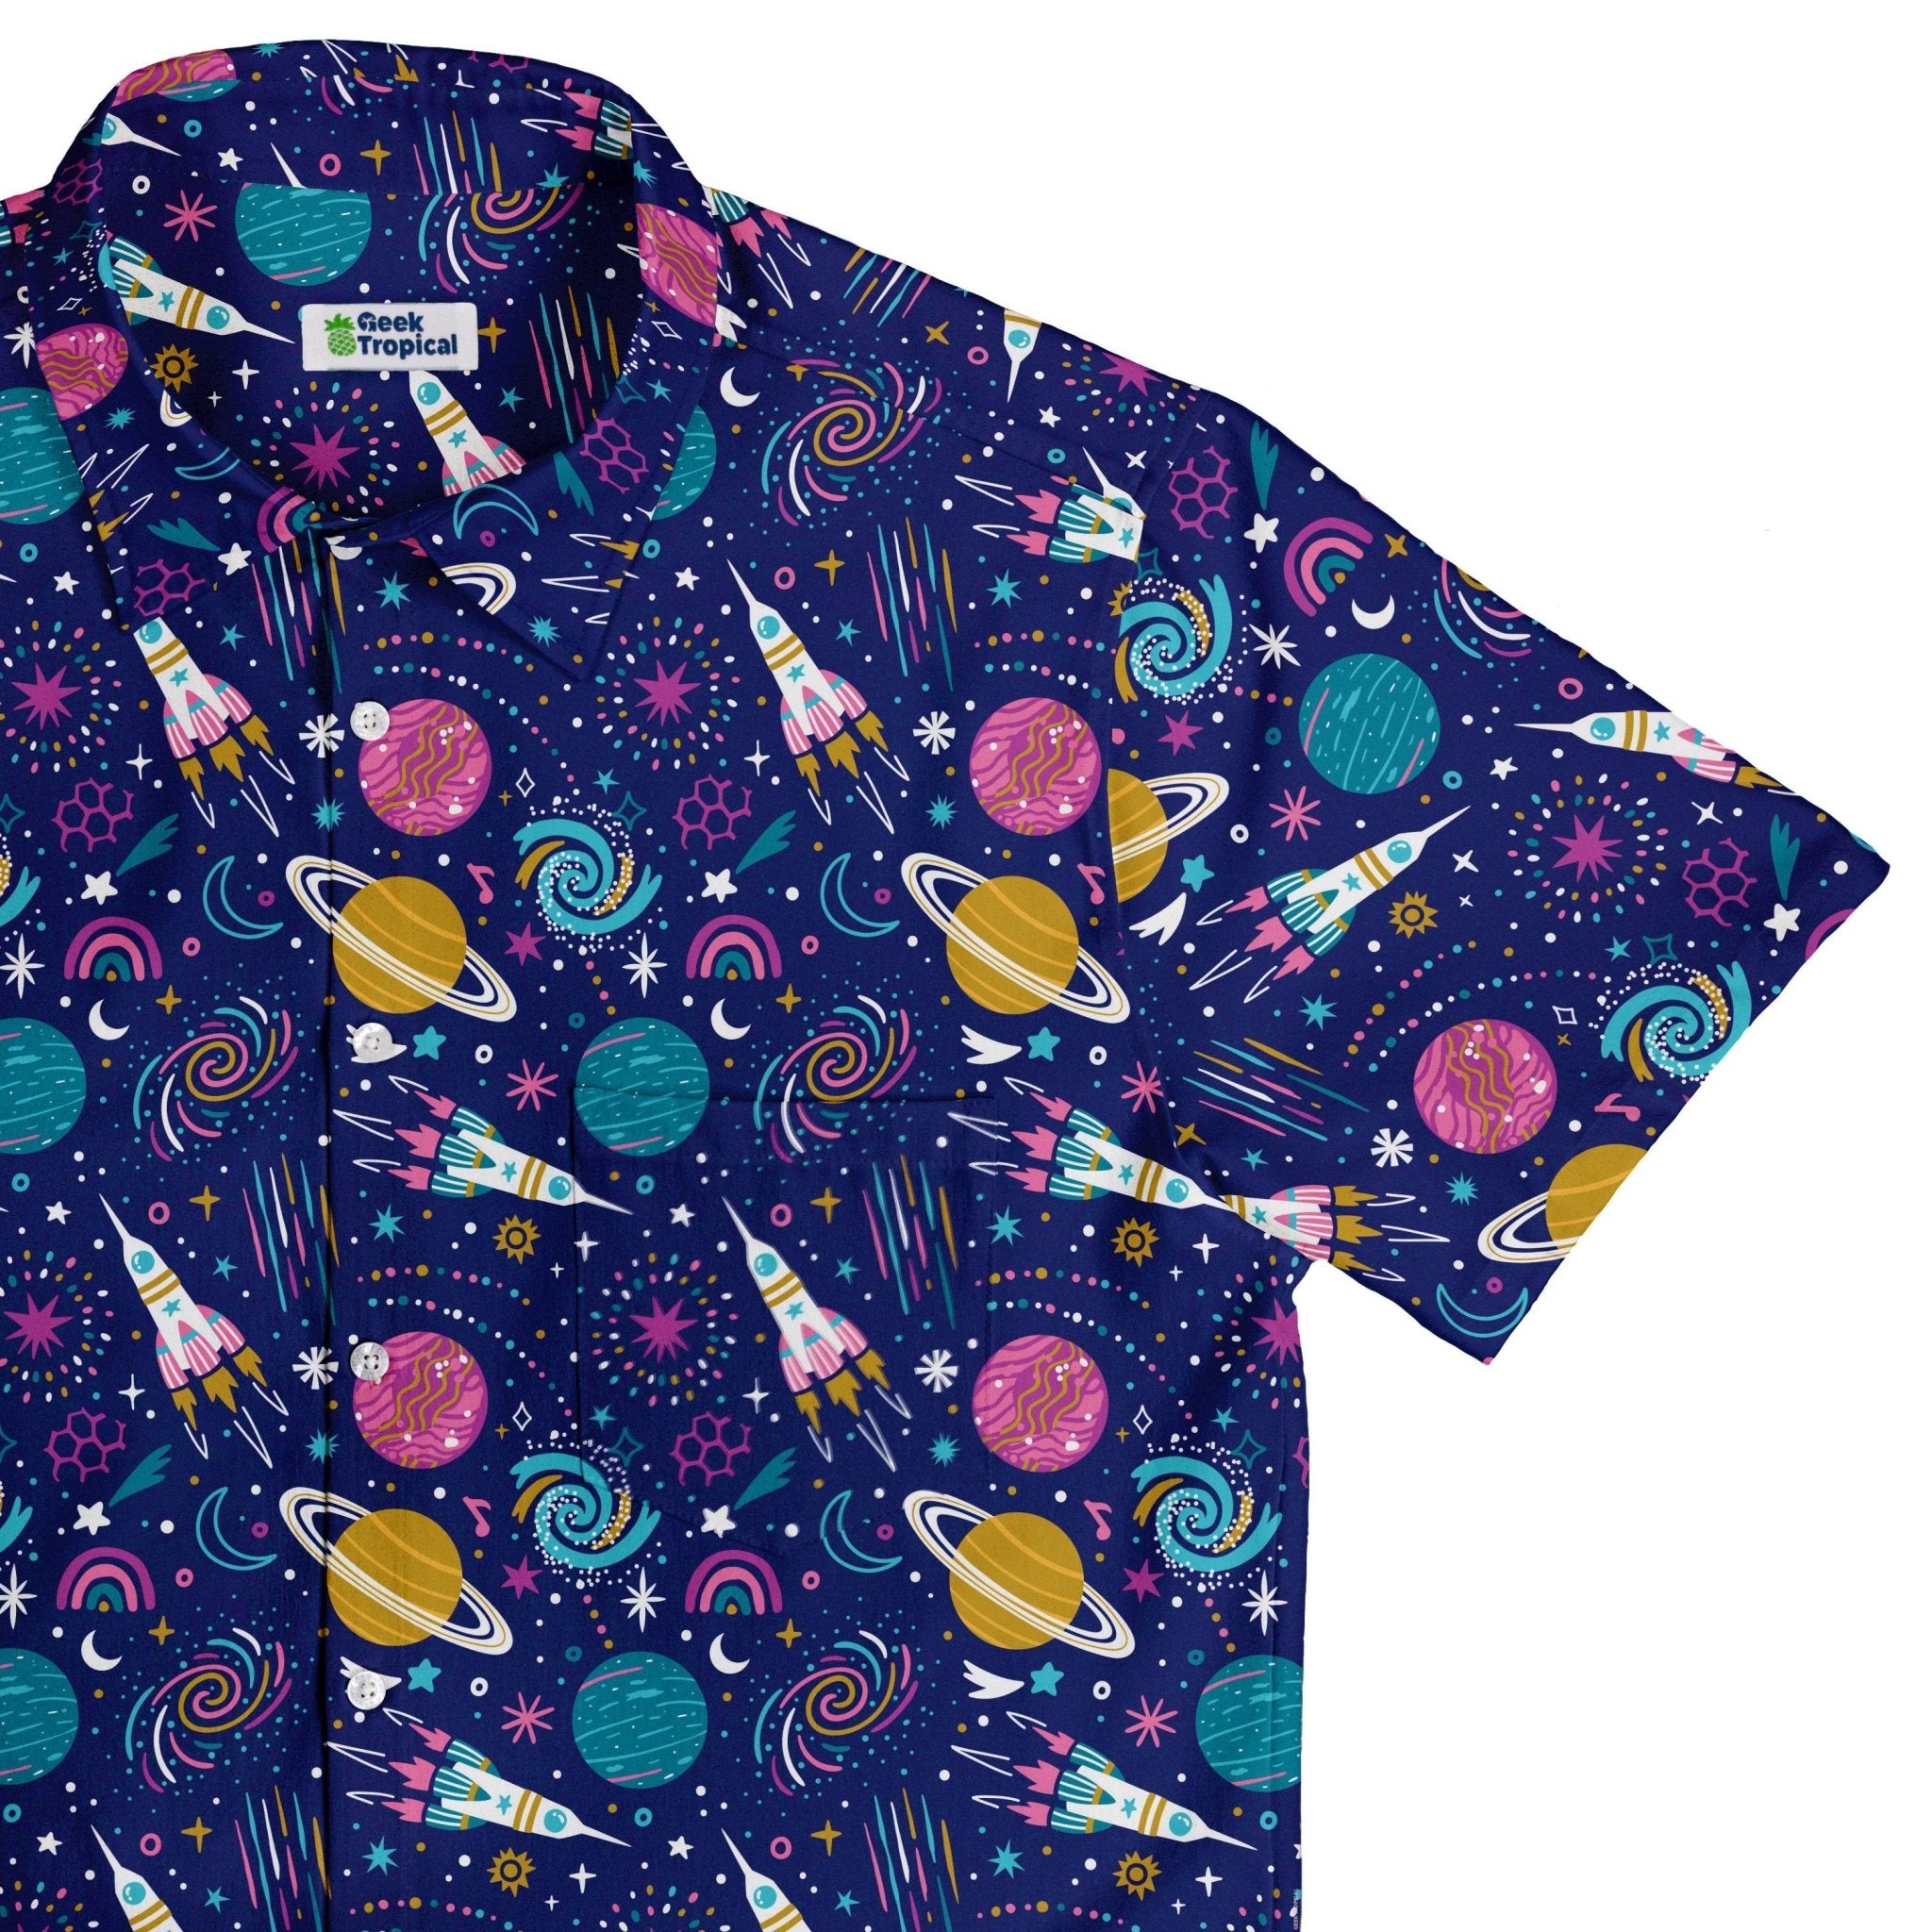 Cosmic Cute Outer Space Button Up Shirt - adult sizing - Maximalist Patterns - outer space & astronaut print